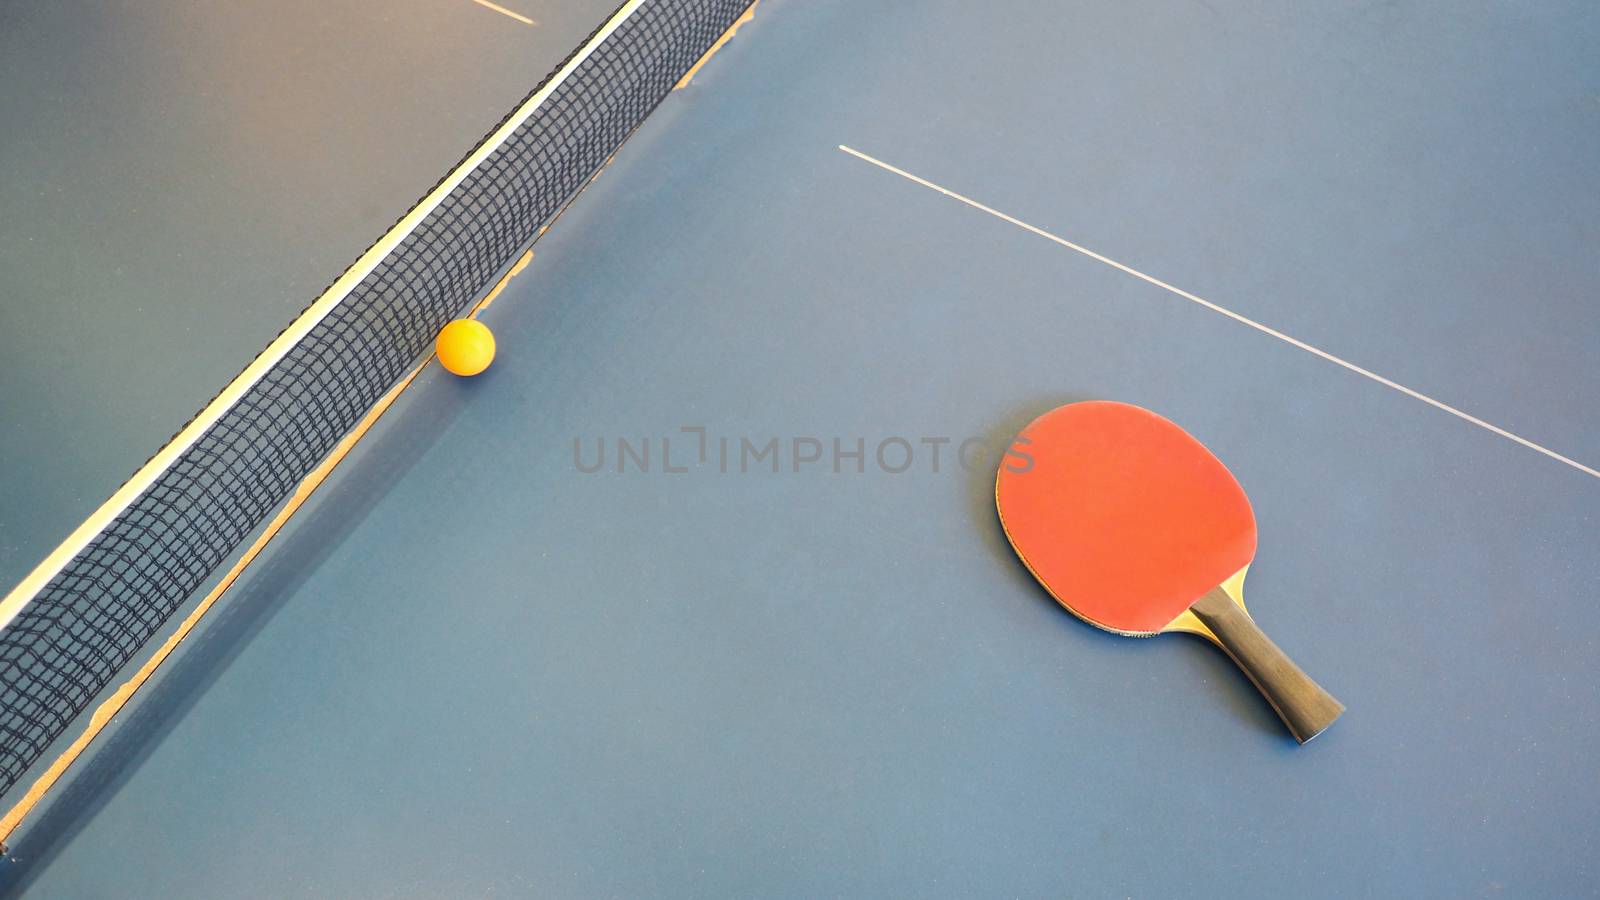 Top view of table tennis or ping-pong table by gnepphoto